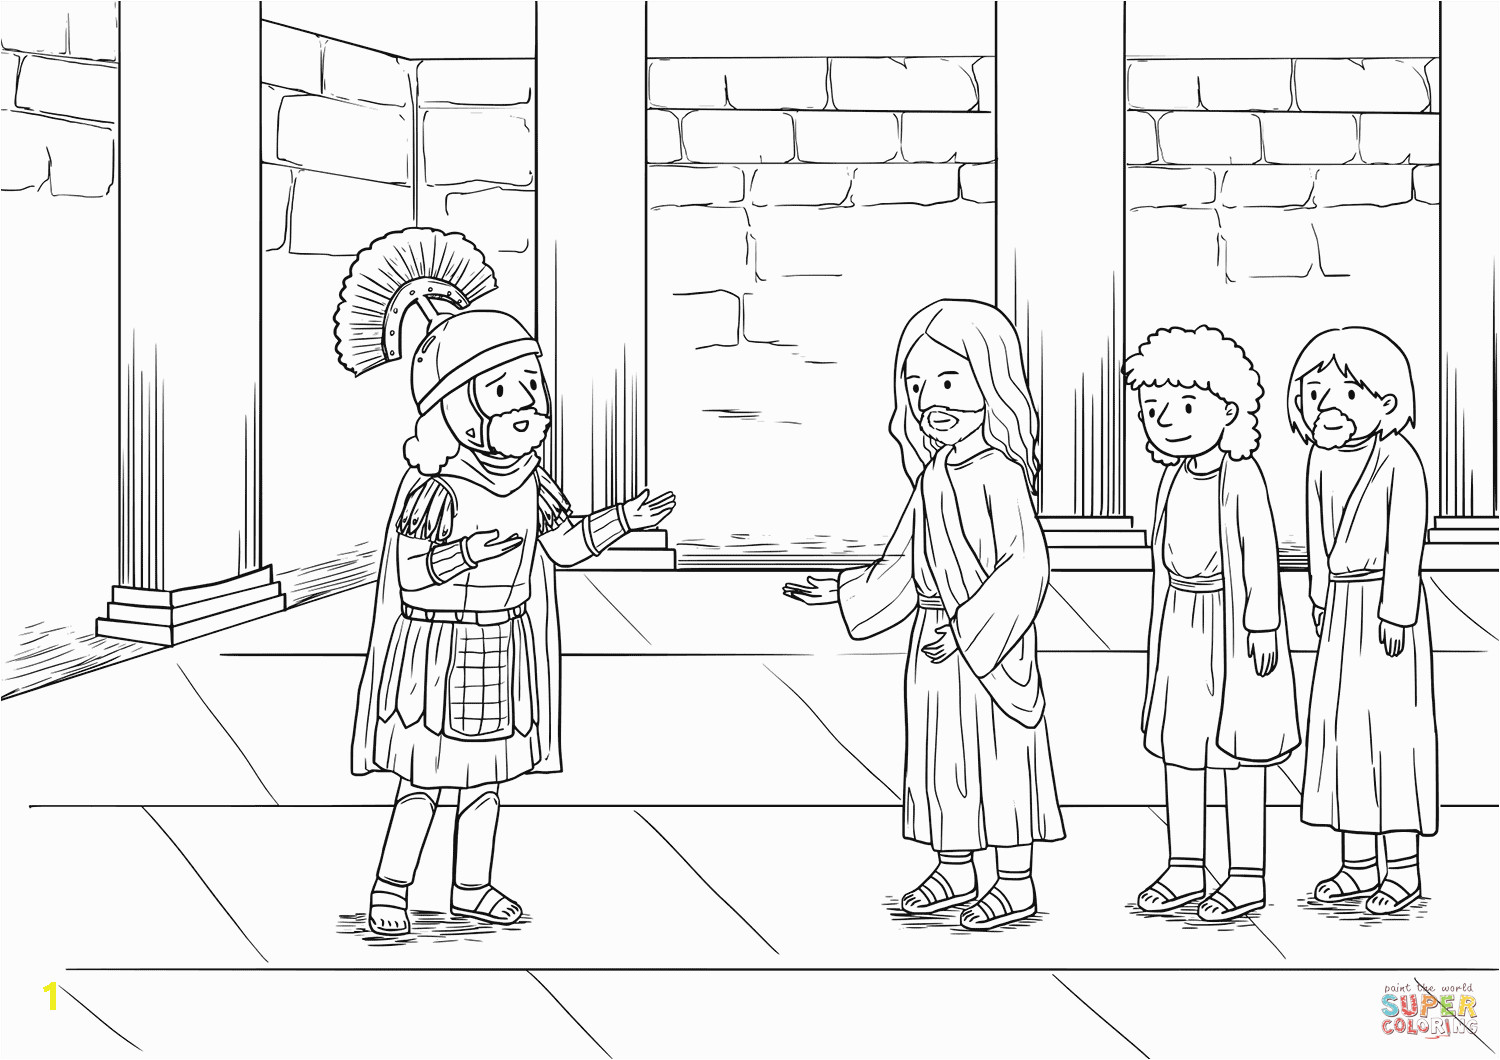 Jesus and the Centurion S Servant Coloring Page the Healing Of the Centurion S Servant Printable